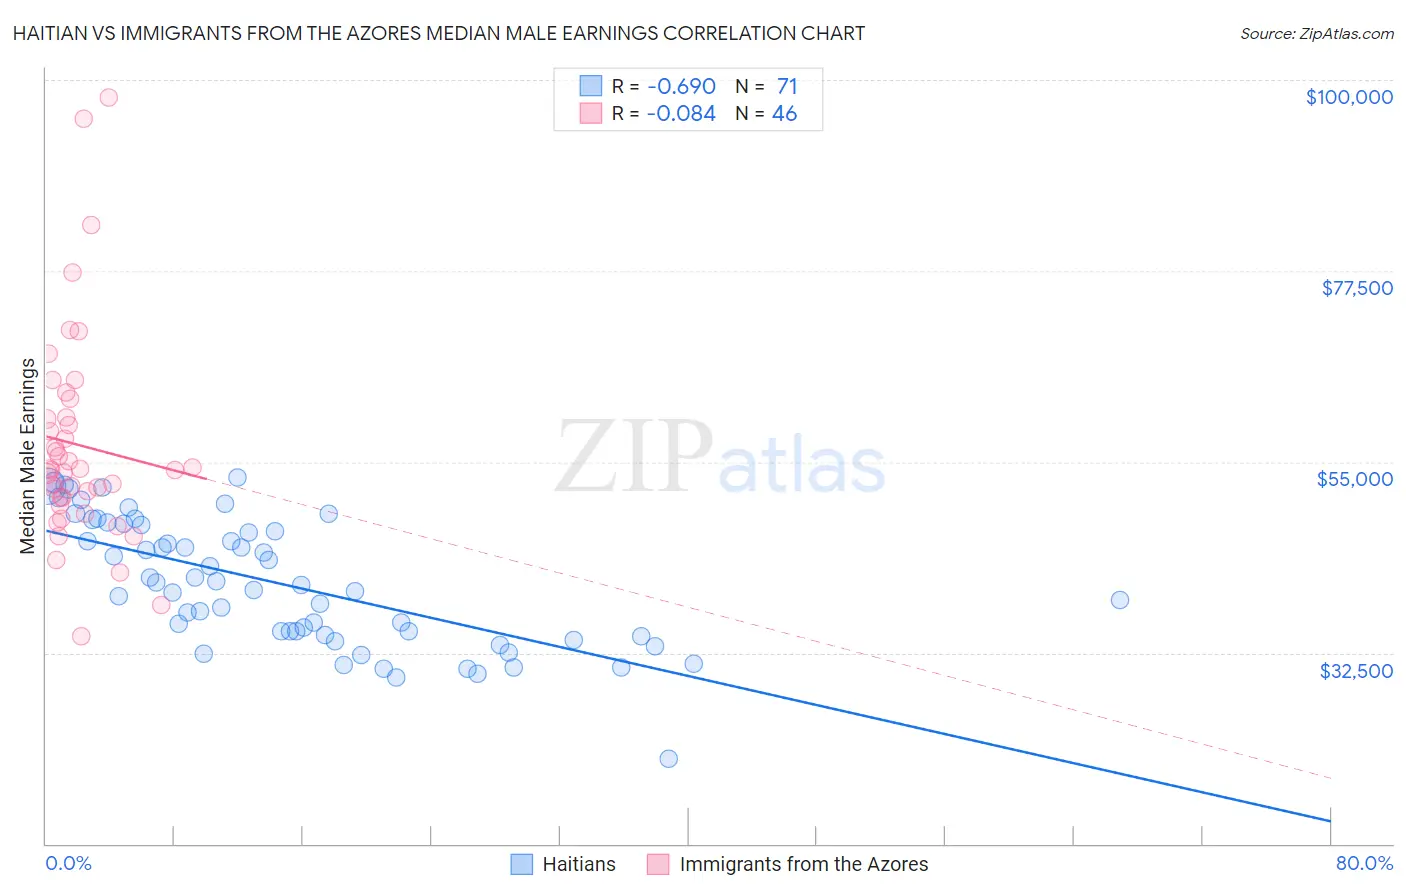 Haitian vs Immigrants from the Azores Median Male Earnings